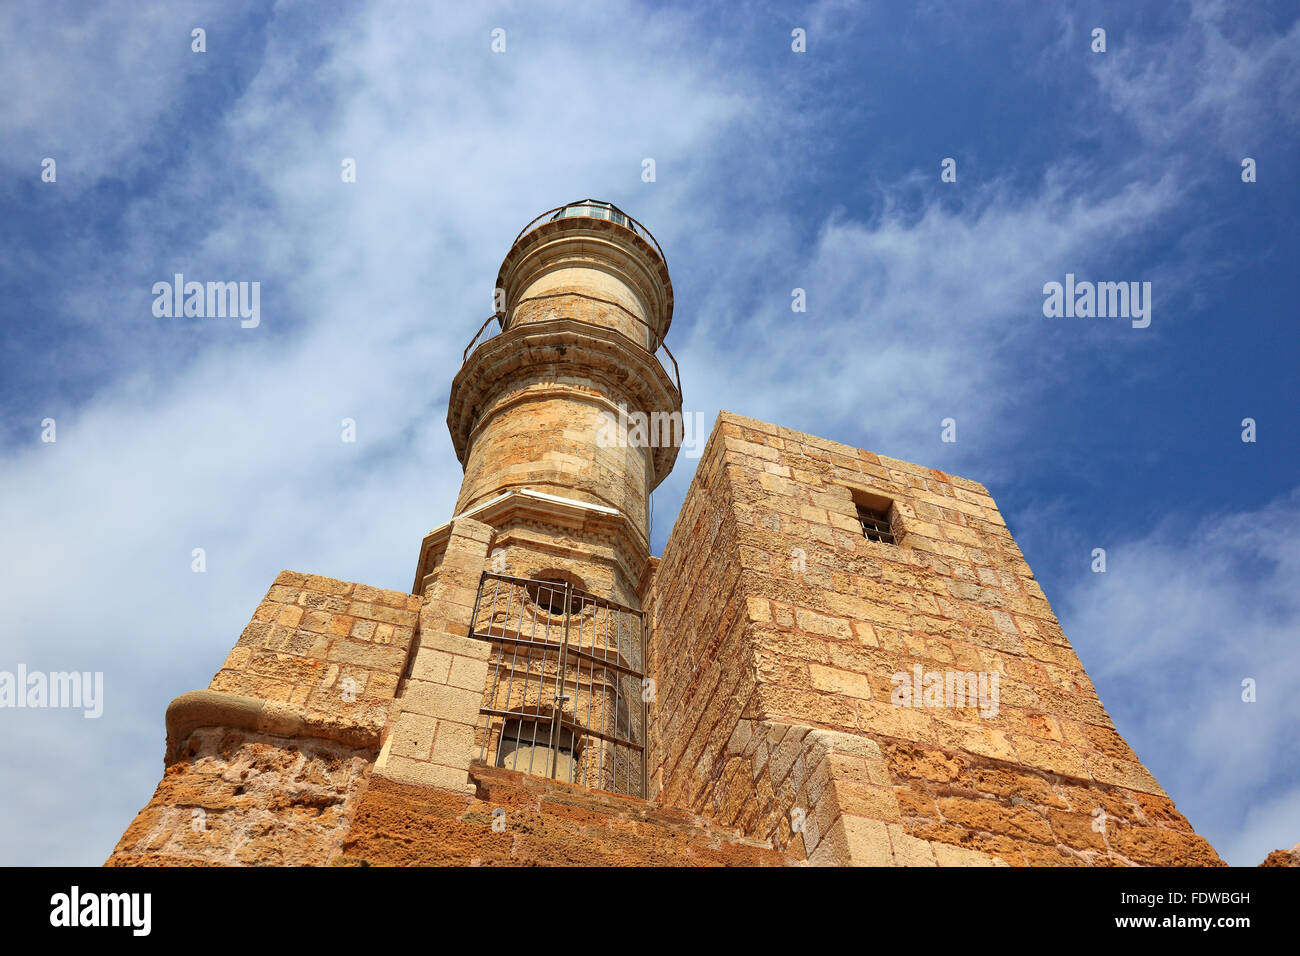 Crete, port Chania, Venetian lighthouse in the harbour Stock Photo